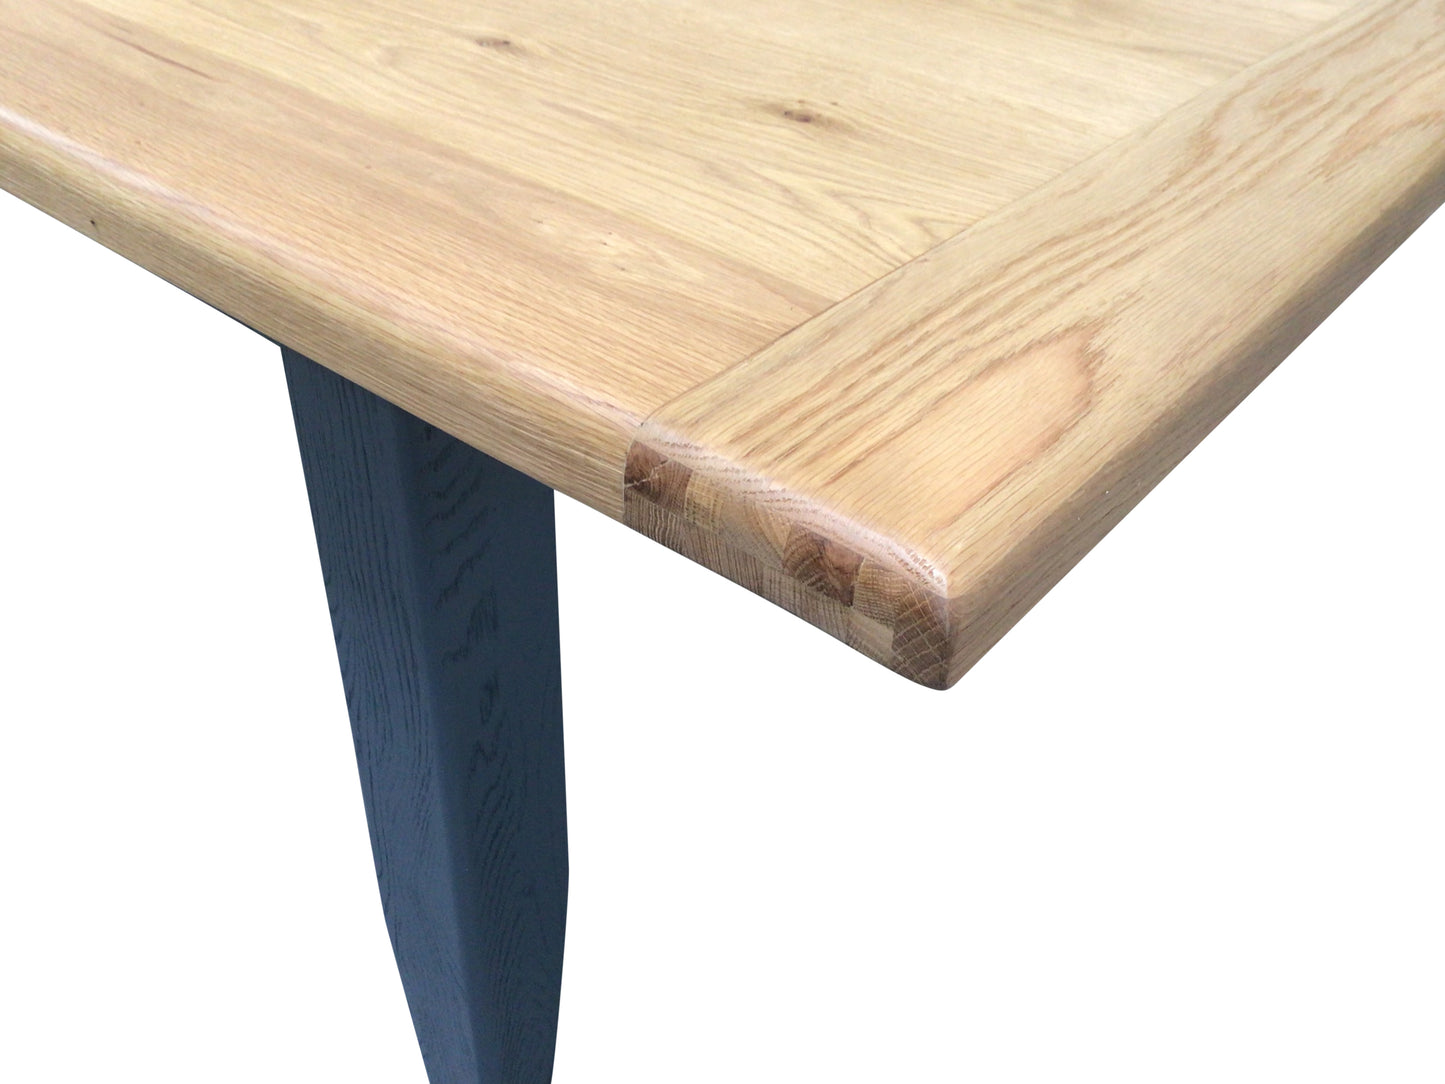 Calgary Oak 1.8m Ext Dining Table painted Night Blue